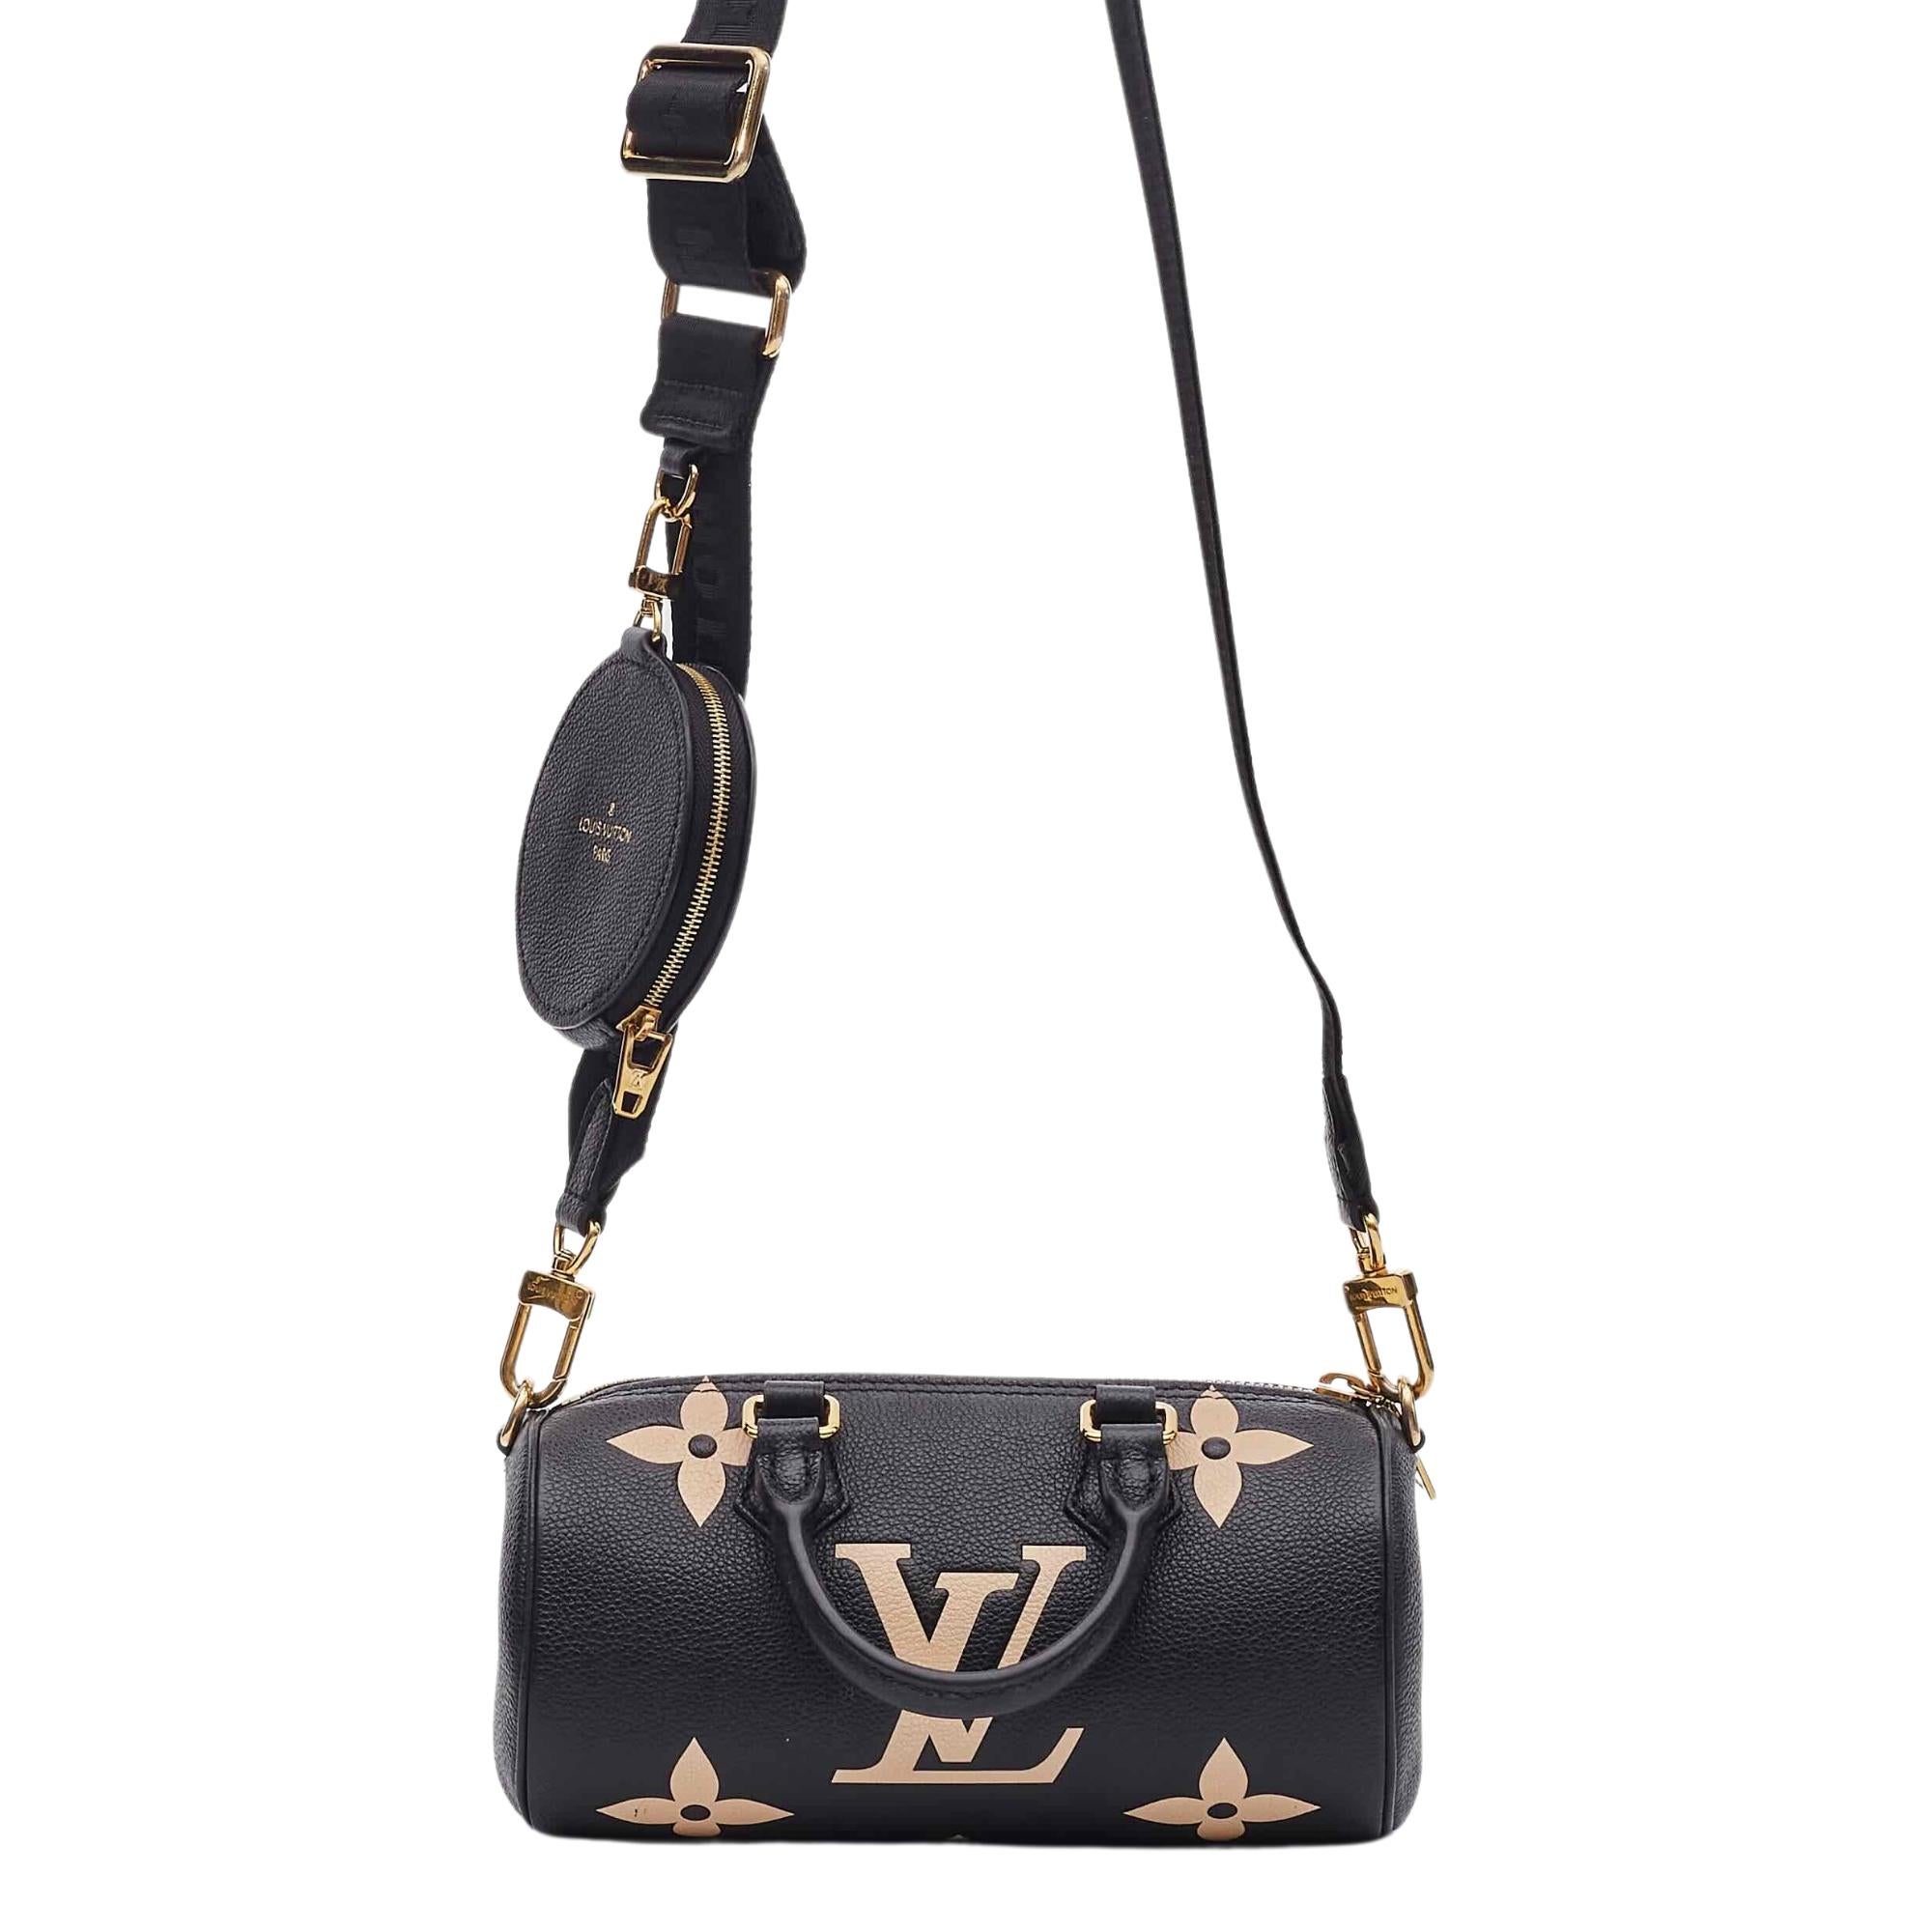 This limited edition barrel-shaped bag is made of traditional empreinte monogram leather in black. It features dual rolled leather top handles and an optional adjustable nylon shoulder strap with a coin purse and gold hardware. The top zipper opens